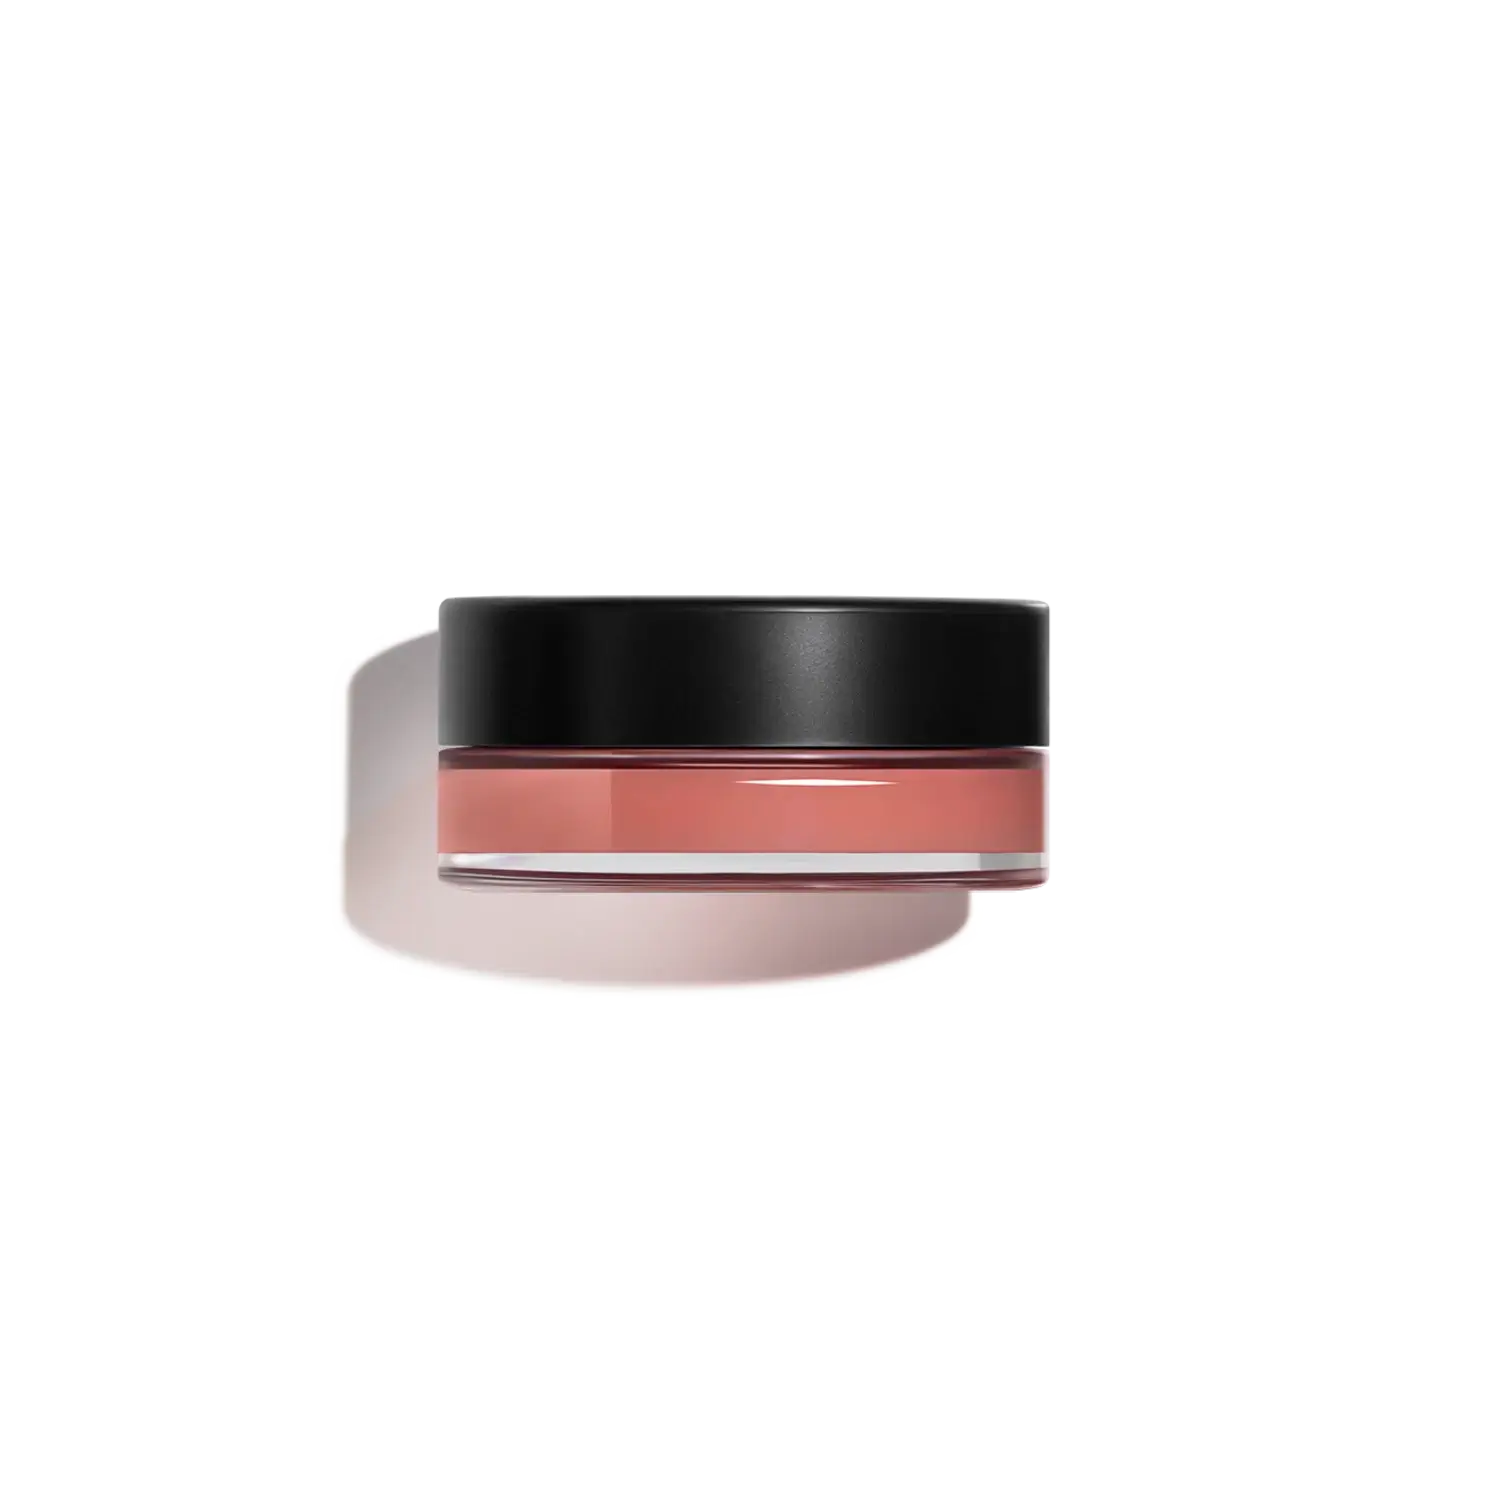 N1 de Chanel Lip and Cheek Balm in the shade “2 Healthy Pink”